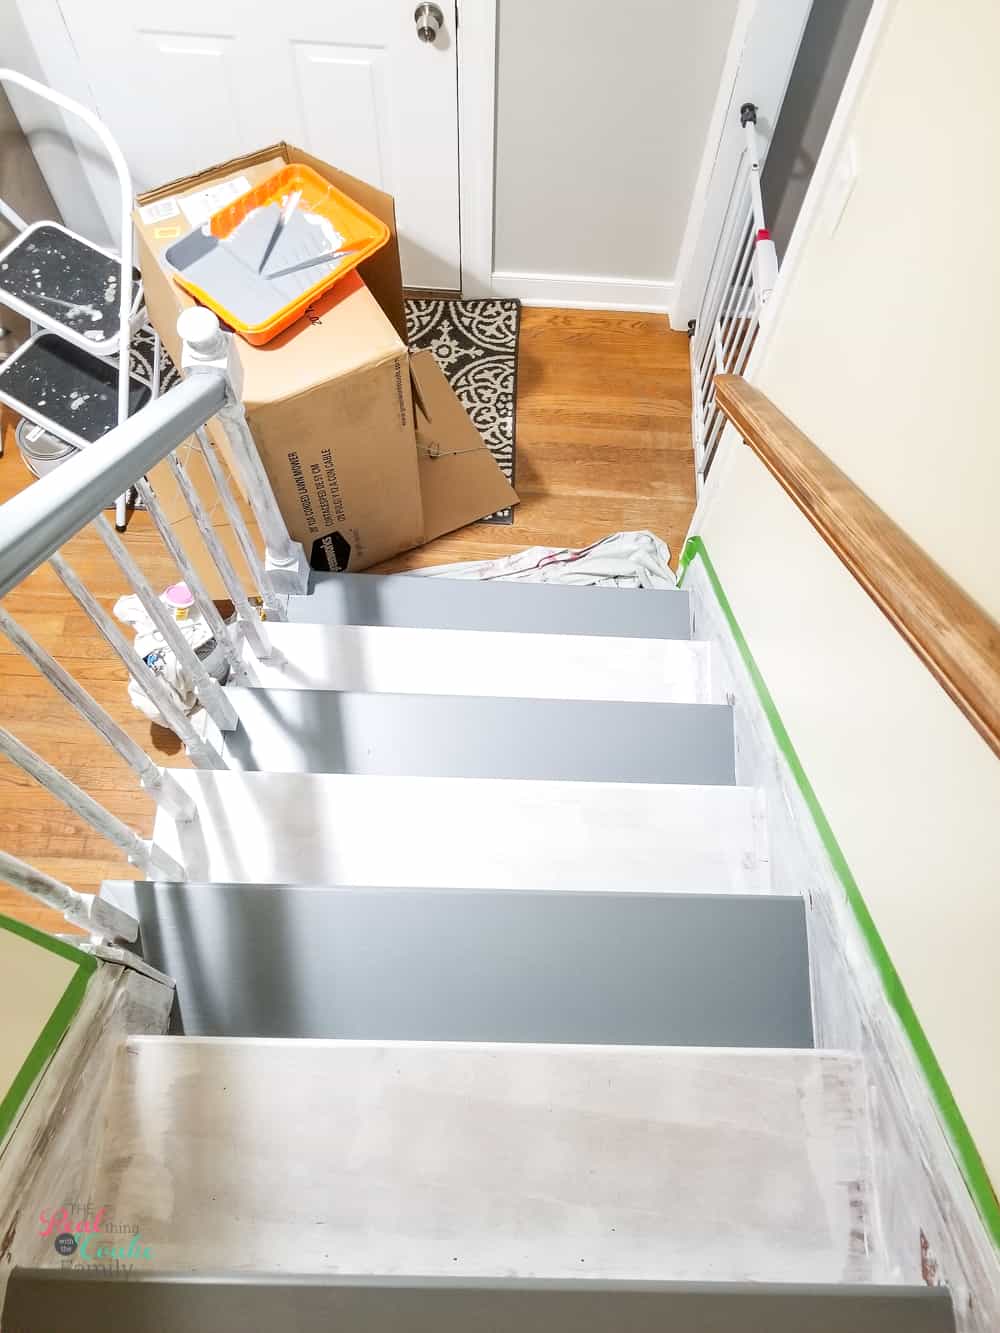 showing blocking off stairs for pets with every other tread painted